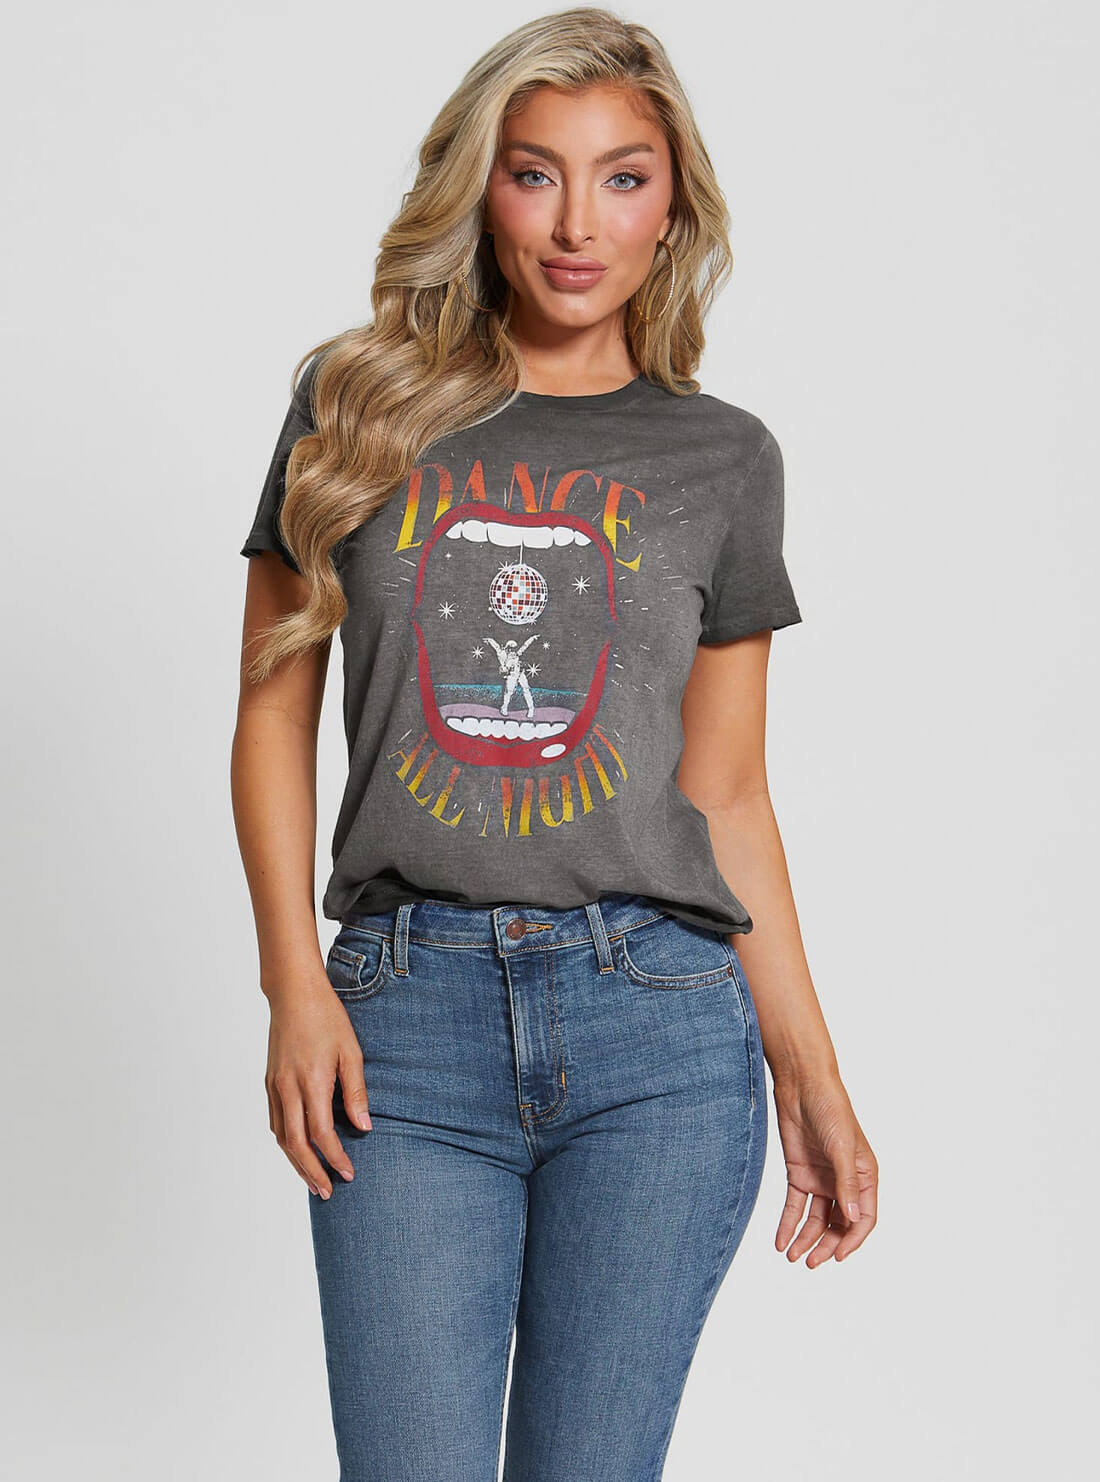 Grey Dance All Night Graphic T-Shirt | GUESS Women's Apparel | front view